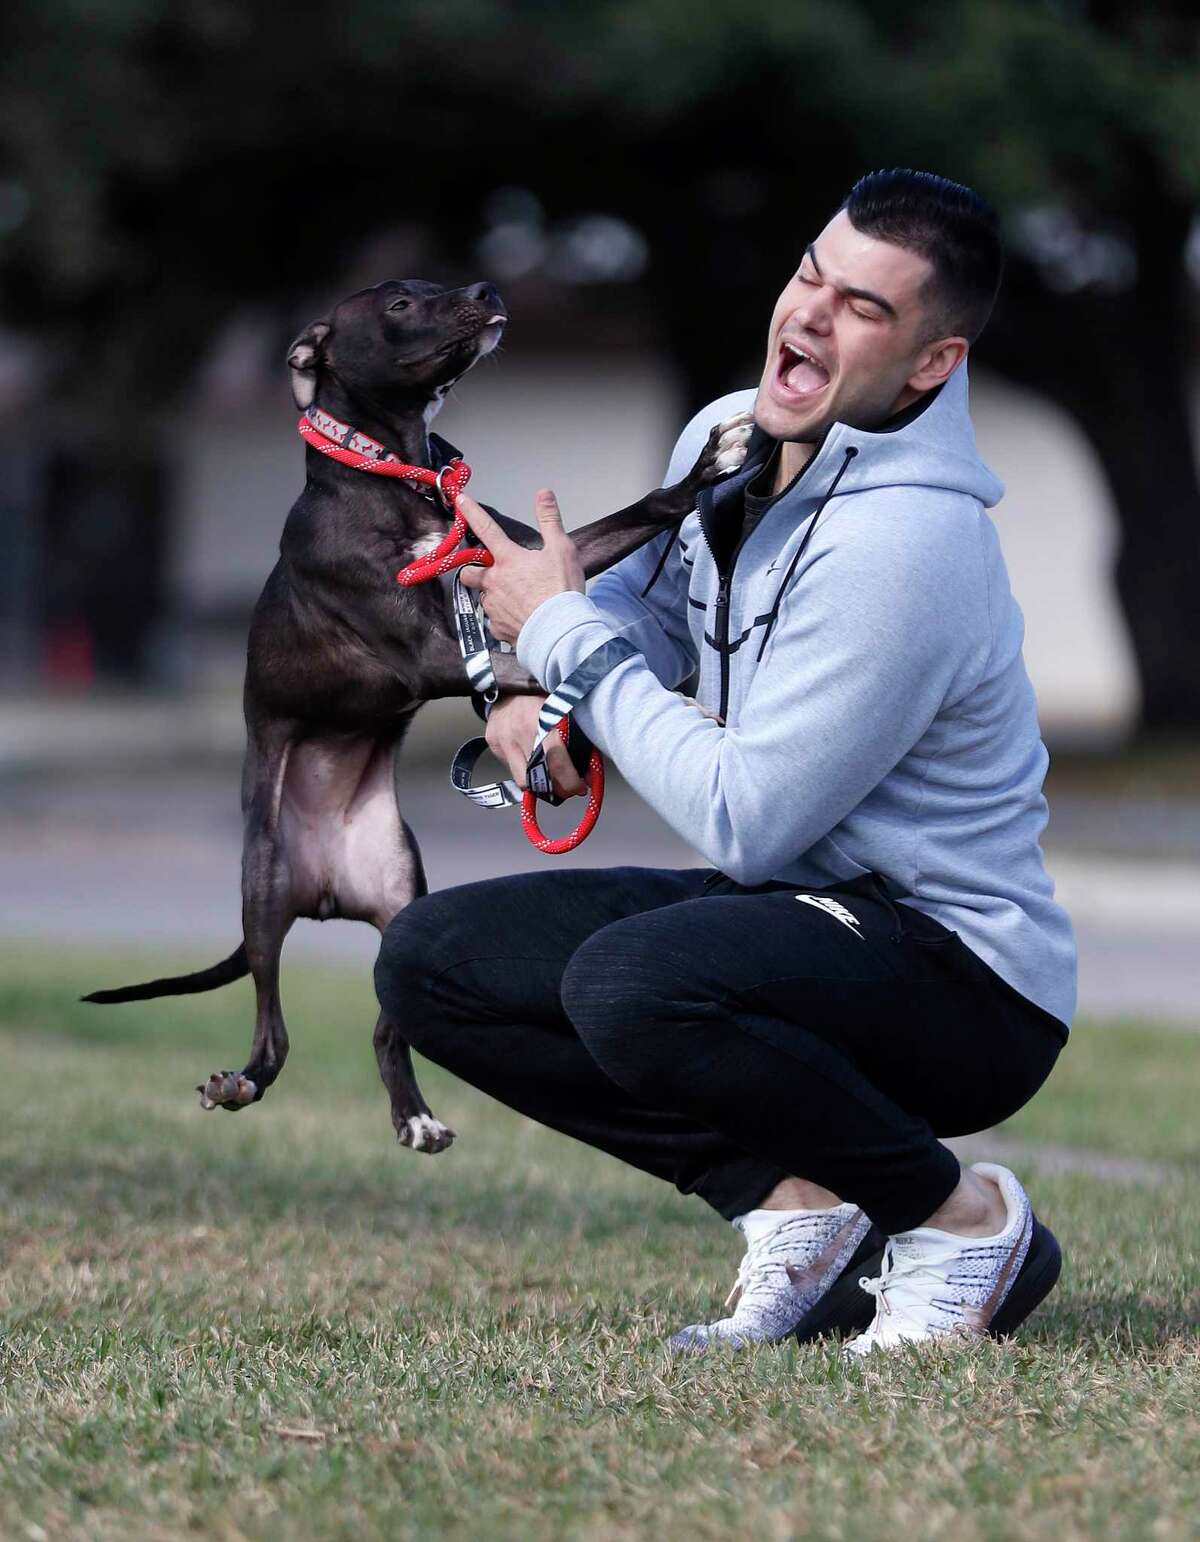 Houston Astros pitcher Lance McCullers Jr. plays with "Candy Corn" the dog, as he and his wife, Kara, walked dogs at the Houston Pets Alive pet rescue and adoption center at 8620 Stella Link Road, Monday, Nov. 20, 2017, in Houston. McCullers is passionate about helping animals in need of adoption. ( Karen Warren / Houston Chronicle )